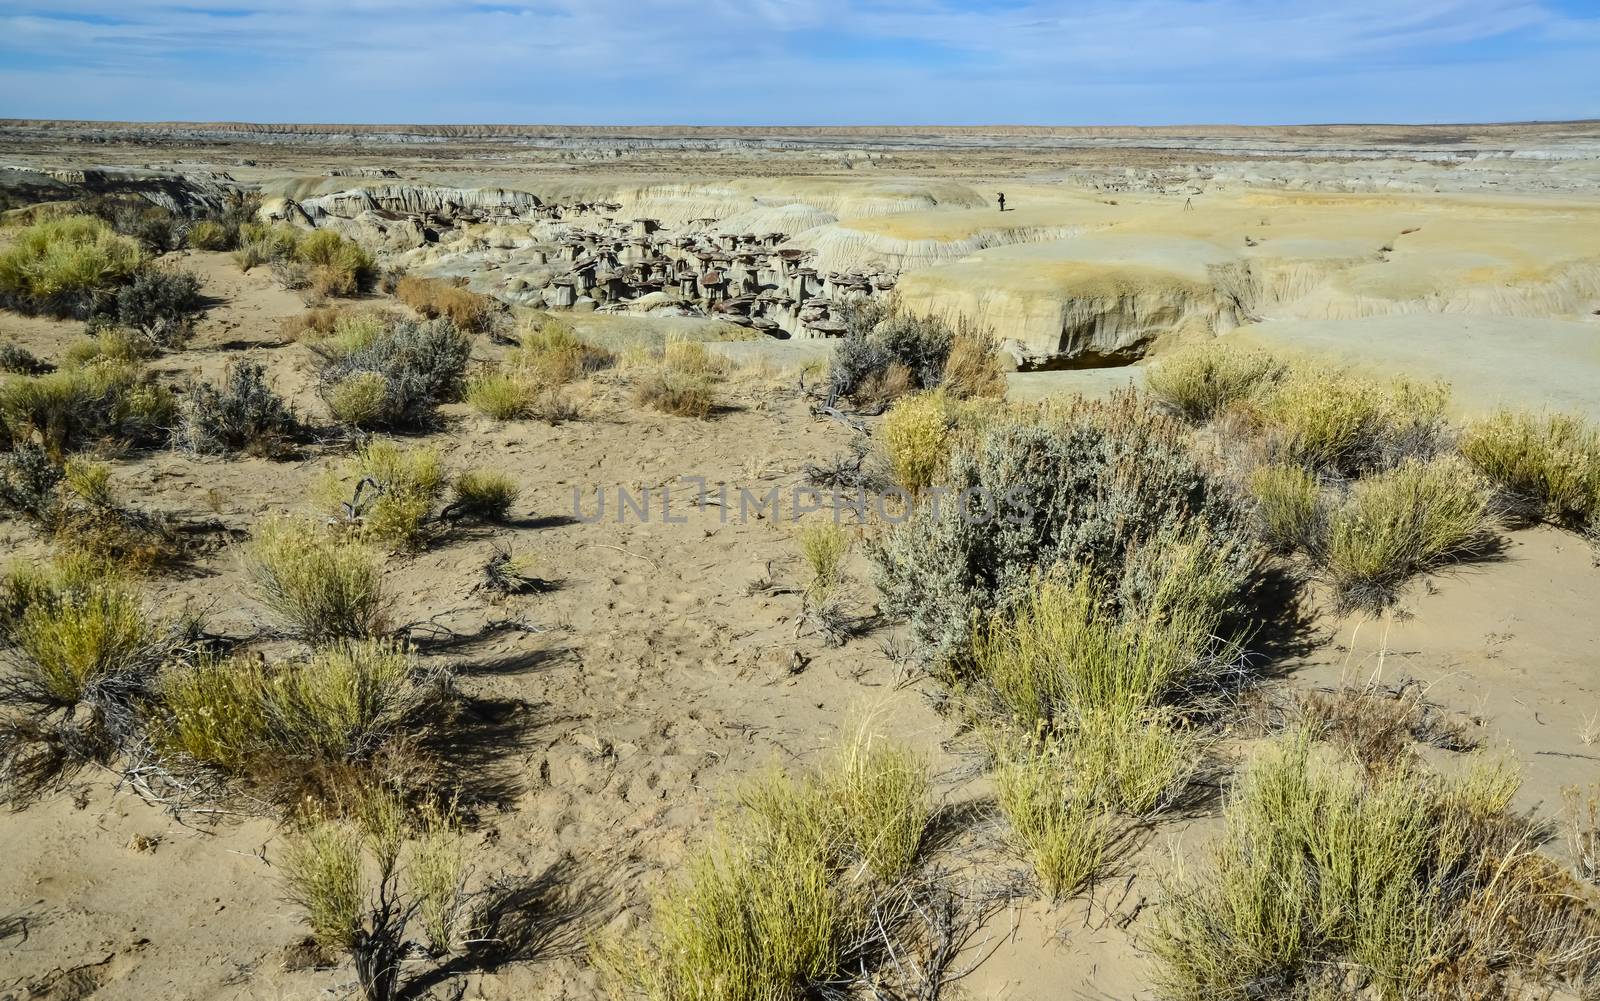 Desert landscape with dry plants in Ah-Shi-Sle-Pah Wilderness Study Area in San Juan County near the city of Farmington, New Mexico. 